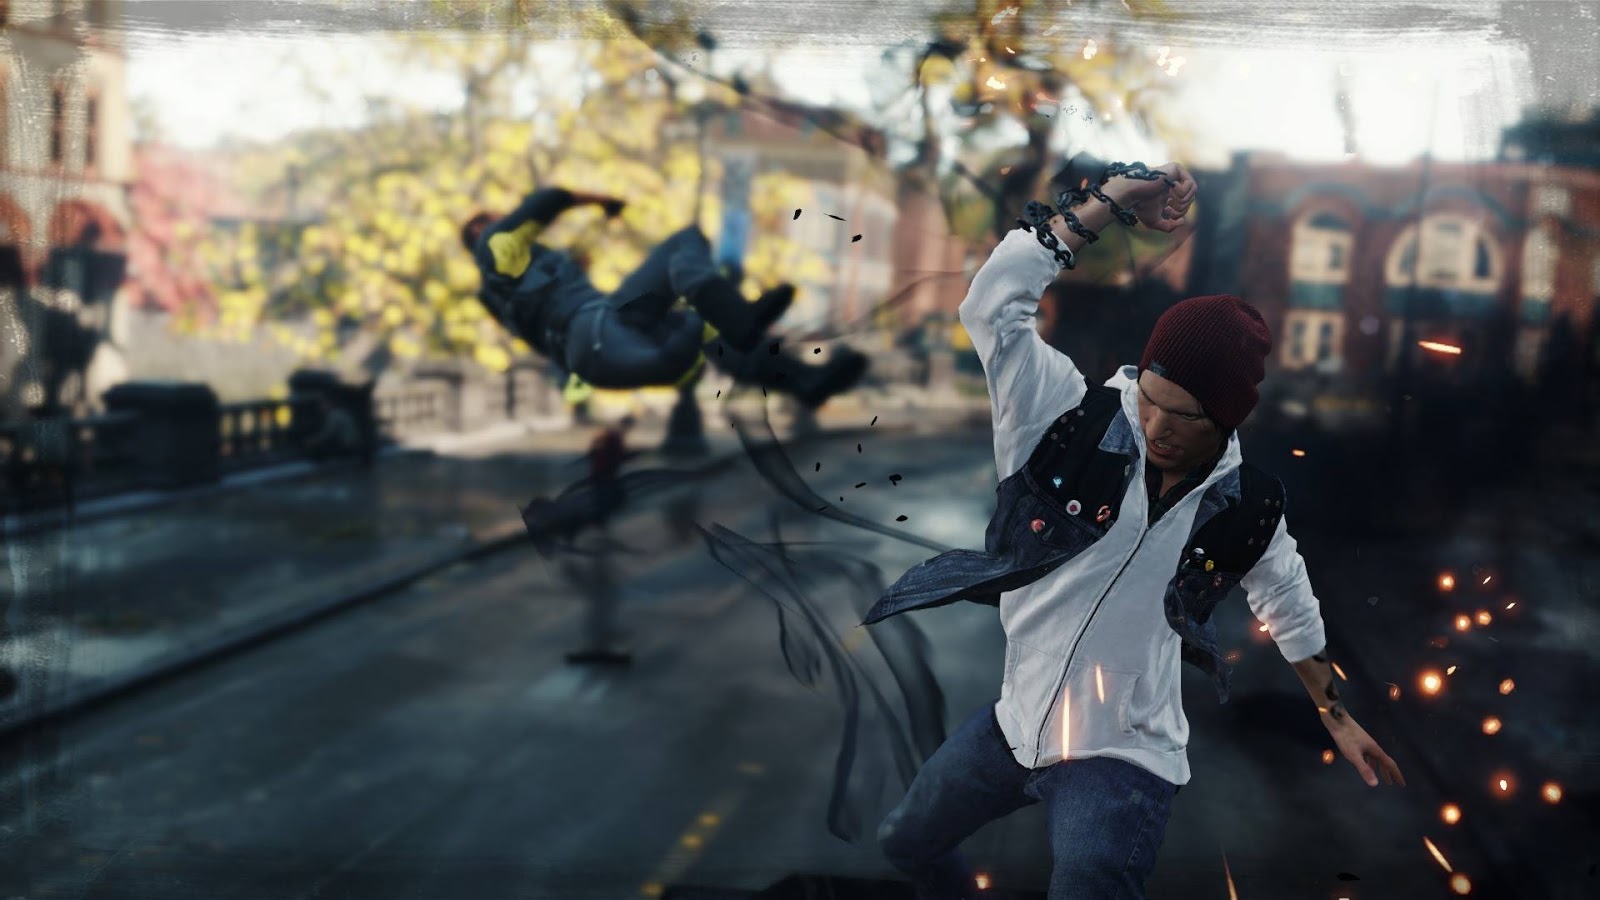 New son son 2. Infamous: second son. Инфеймос секонд сон. Инфеймос секонд Сан 2. Infamous second son 2014.